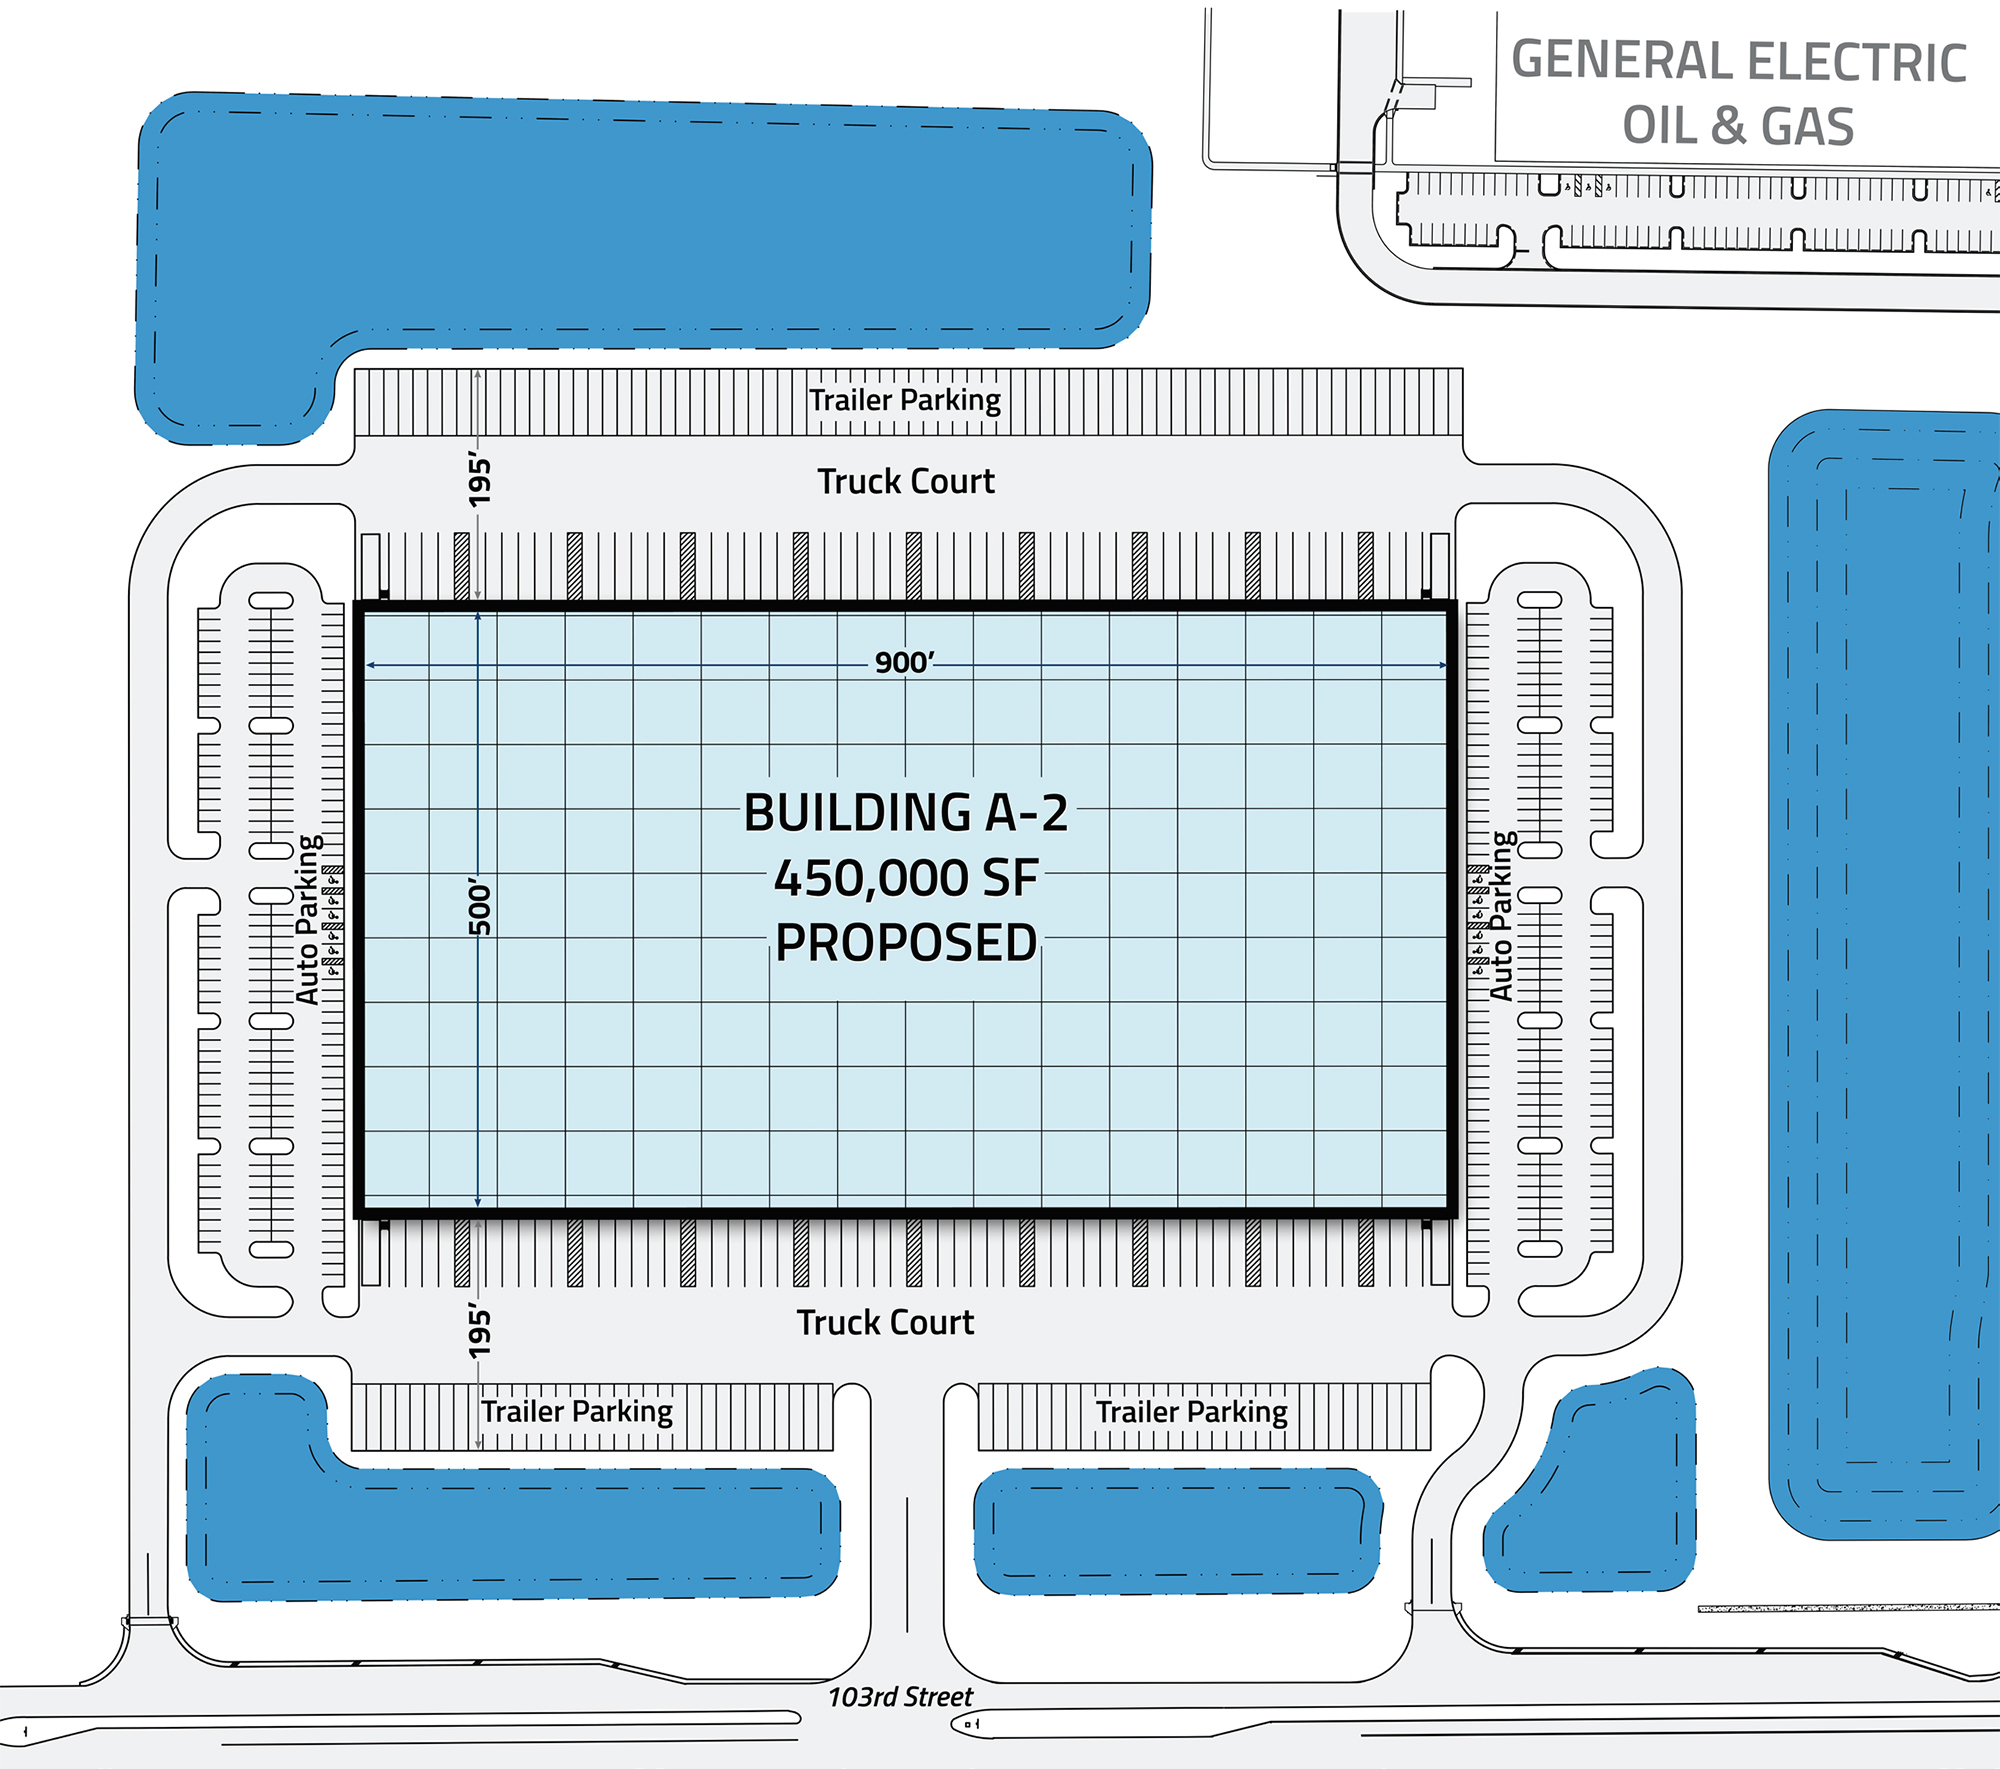 A marketing brochure shows the proposed Building A-2 in the 13000 block of 103rd Street.